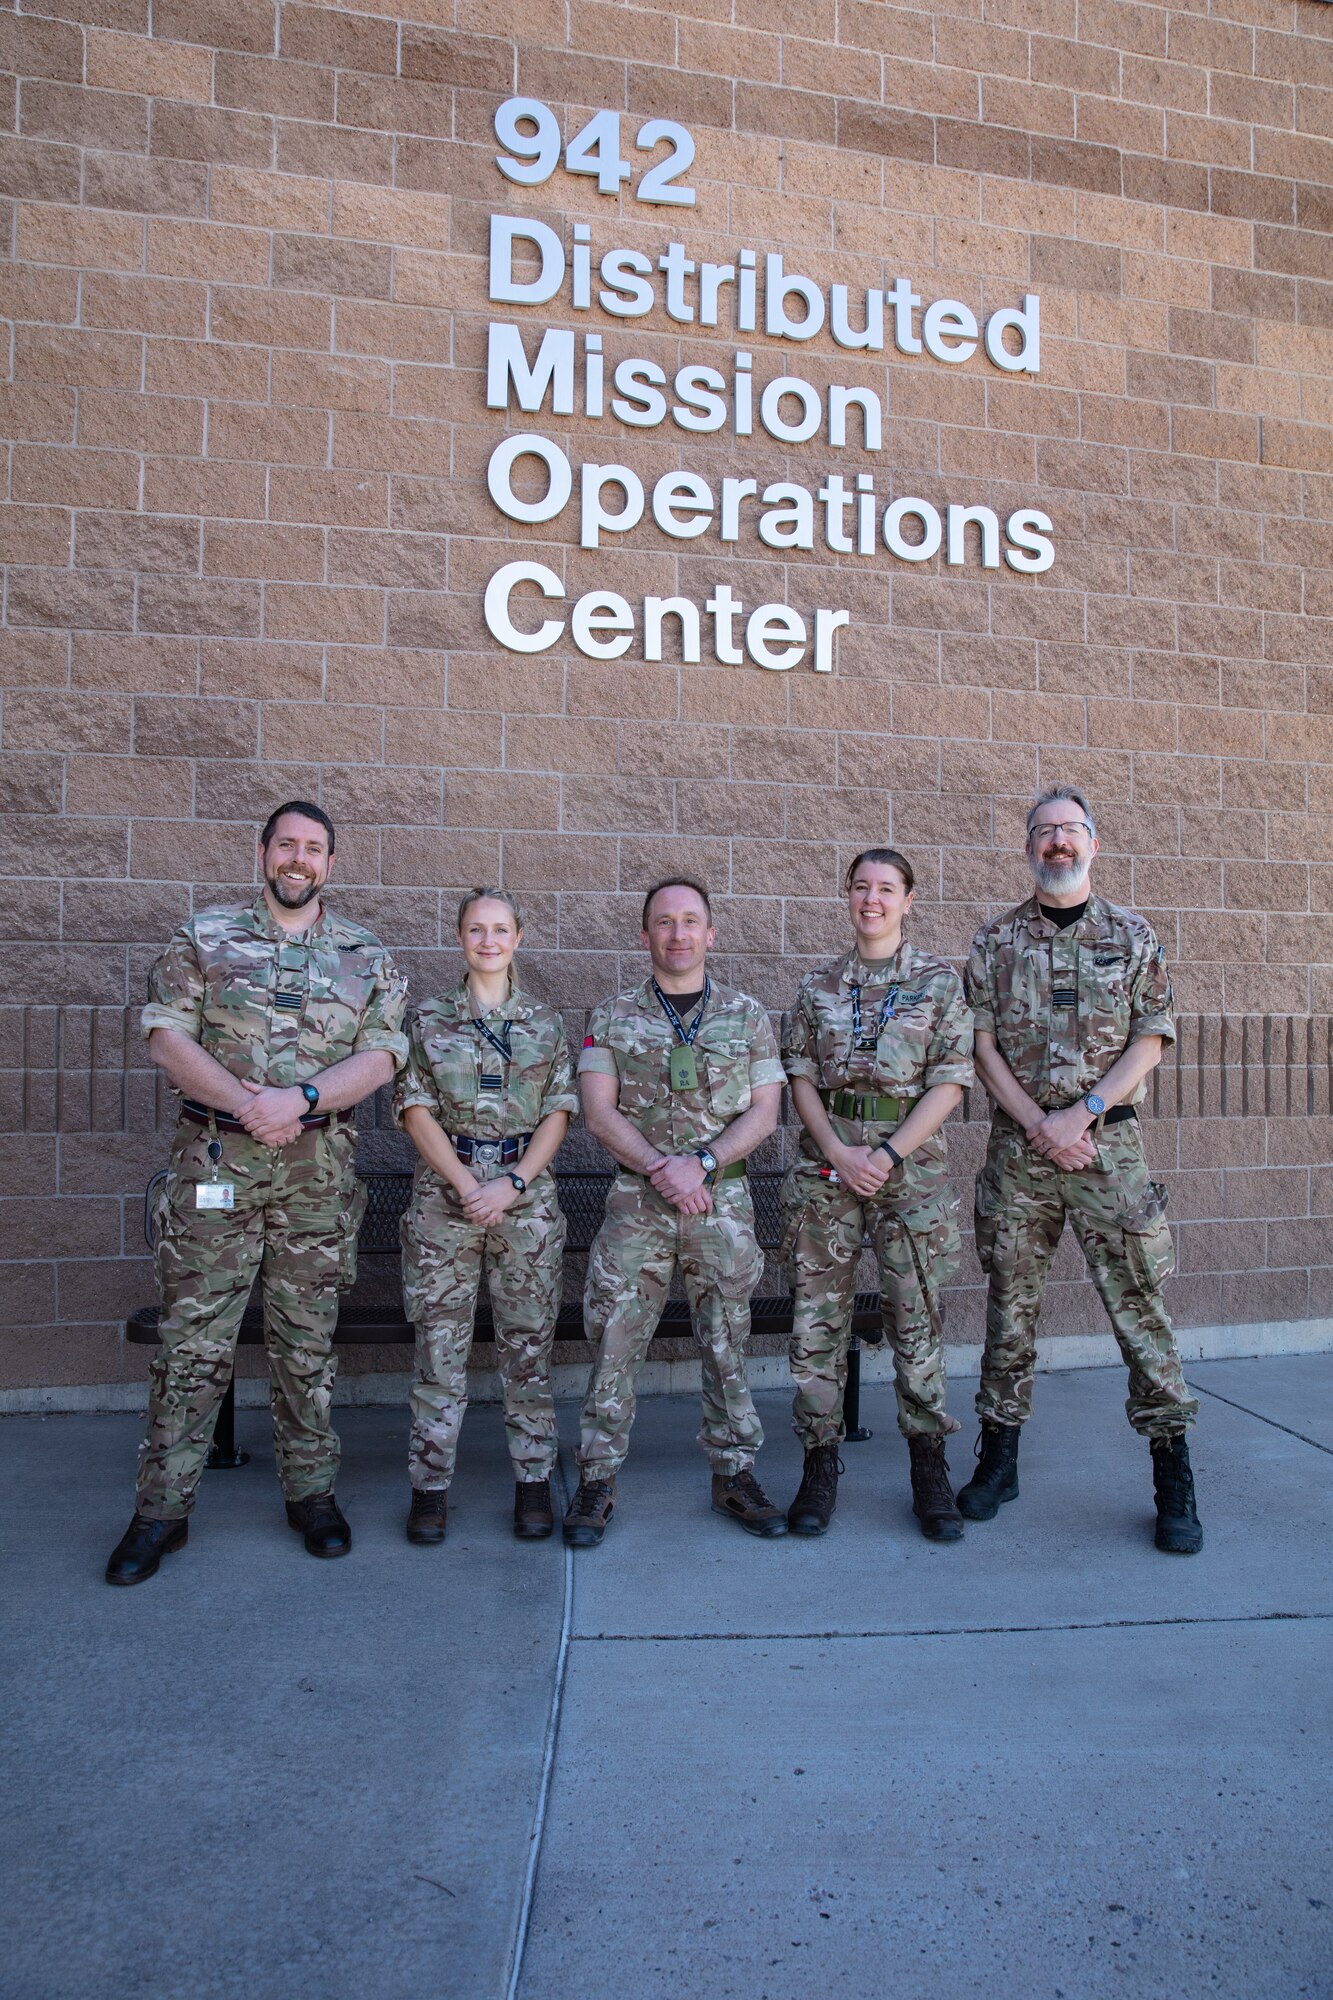 uniformed military members stand in front of brick building with lettering “942 Distributed Mission Operations Center”